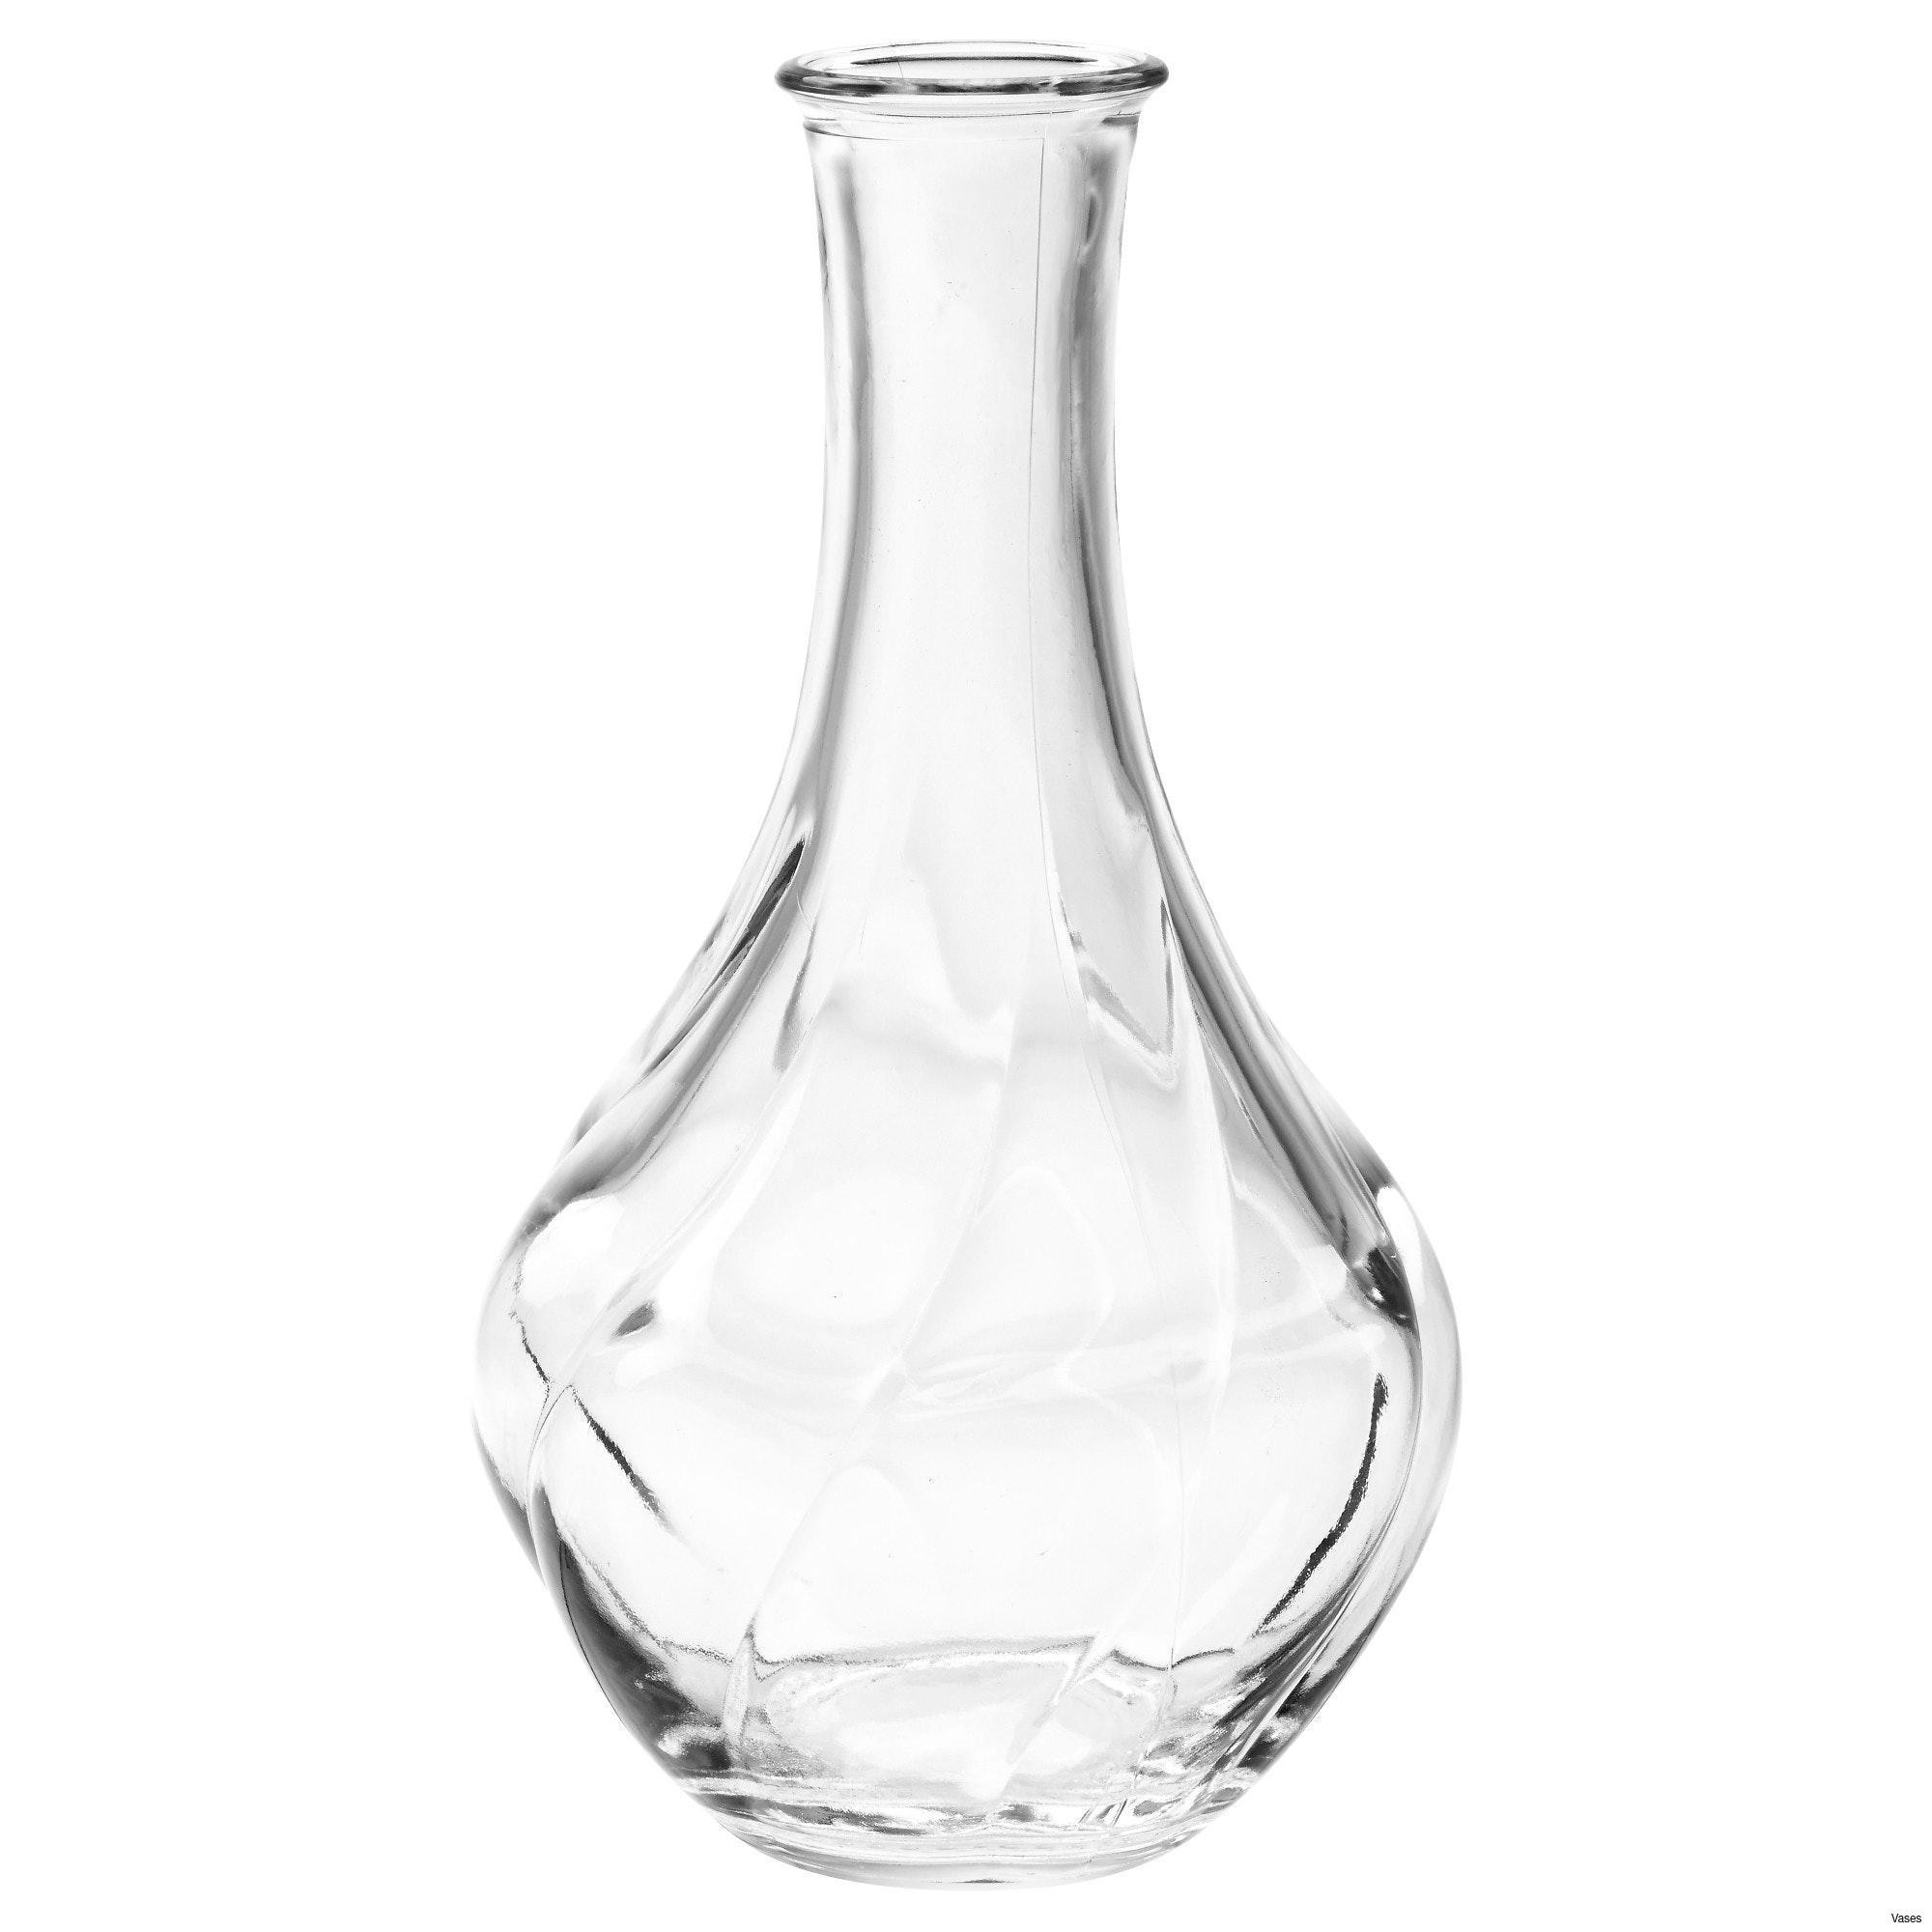 23 Famous Large White Vase 2024 free download large white vase of large white vases photos living room glass vases fresh clear vase 0d in large white vases photos living room glass vases fresh clear vase 0d tags amazing and of